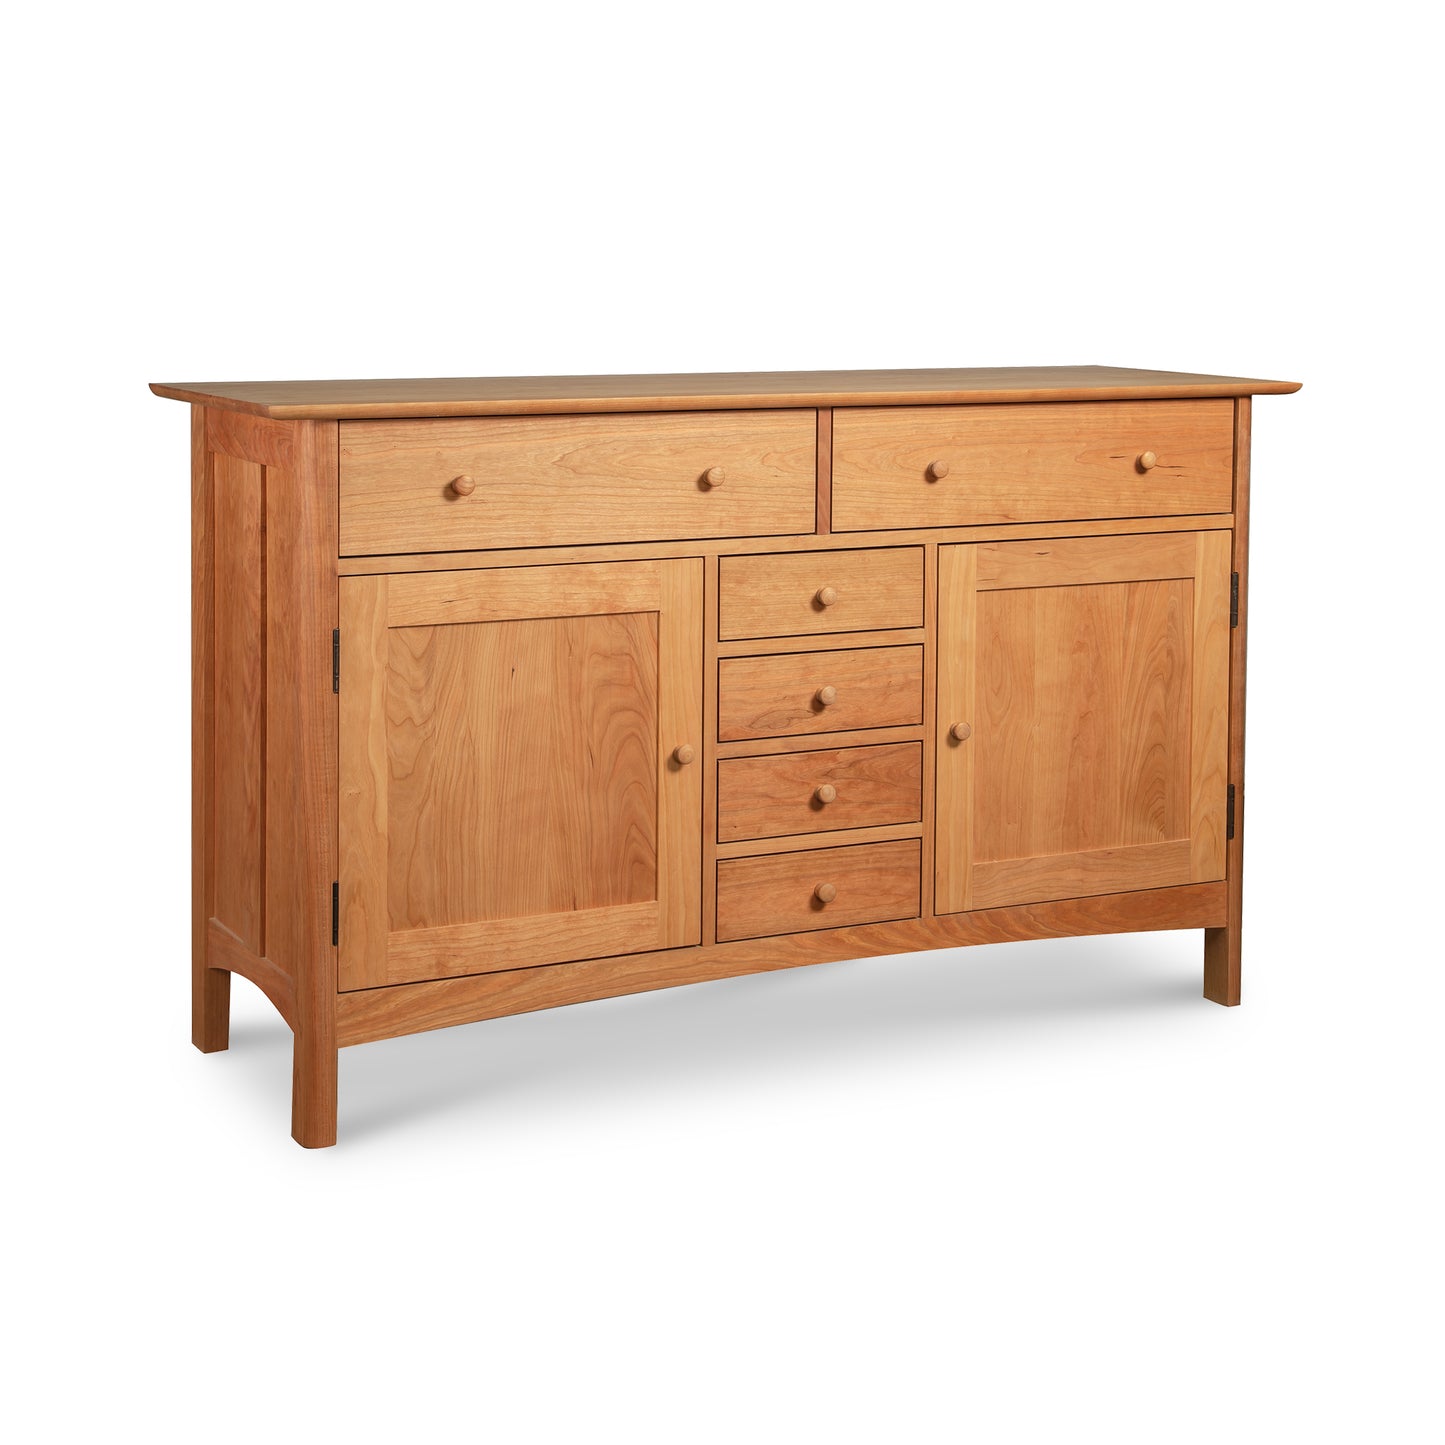 A Vermont Furniture Designs Heartwood Shaker Sideboard, crafted from solid hardwoods, featuring two cabinet doors and several drawers isolated on a white background.